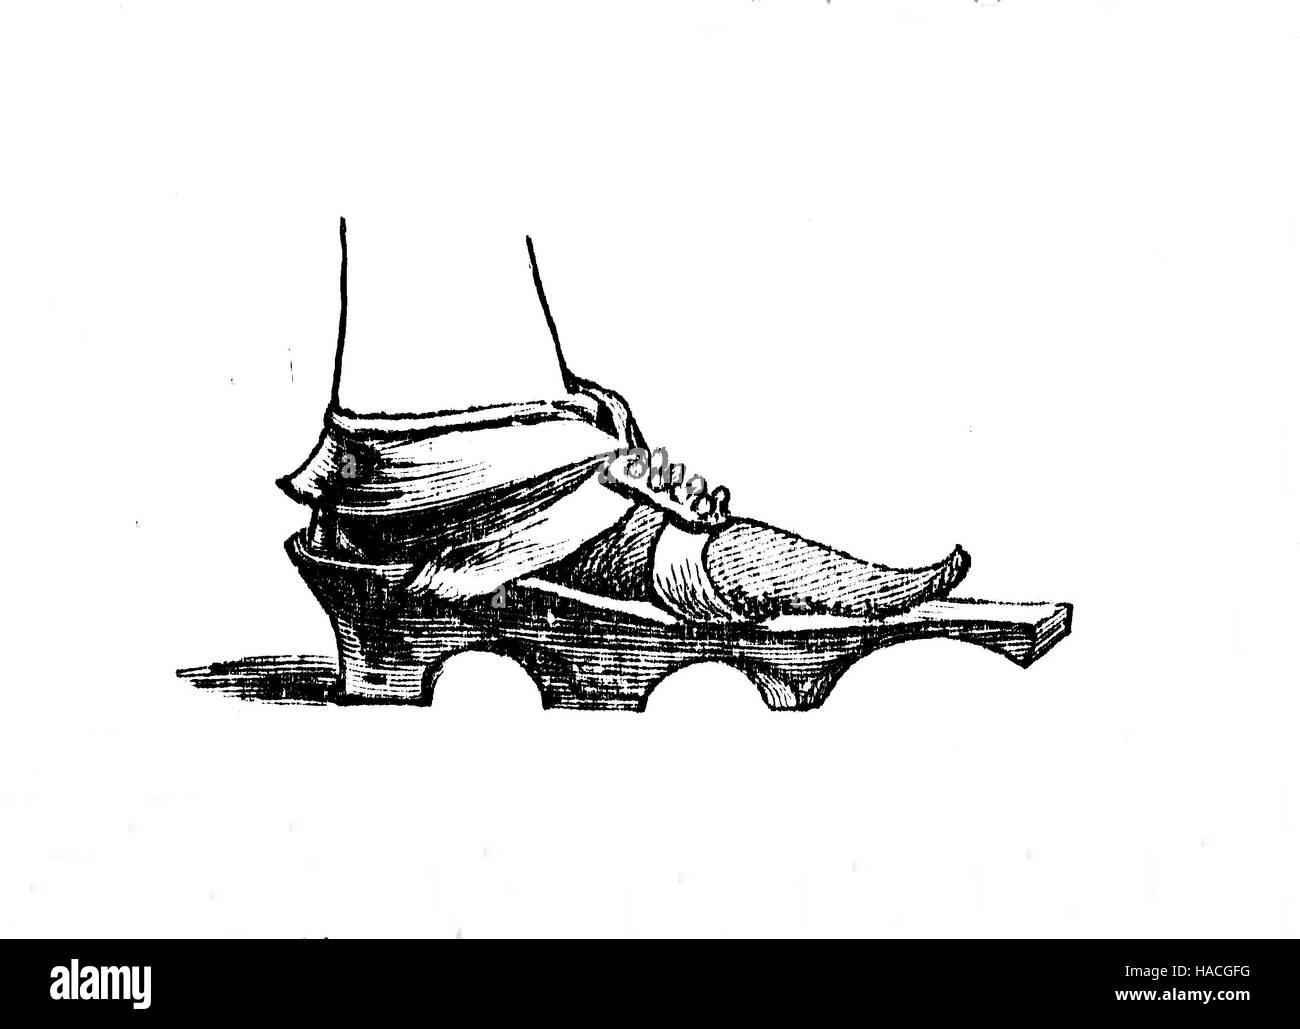 Shoes, fashion of the past. Pattens, are protective overshoes that were worn in Europe from the Middle Ages, historic illustration, woodcut Stock Photo